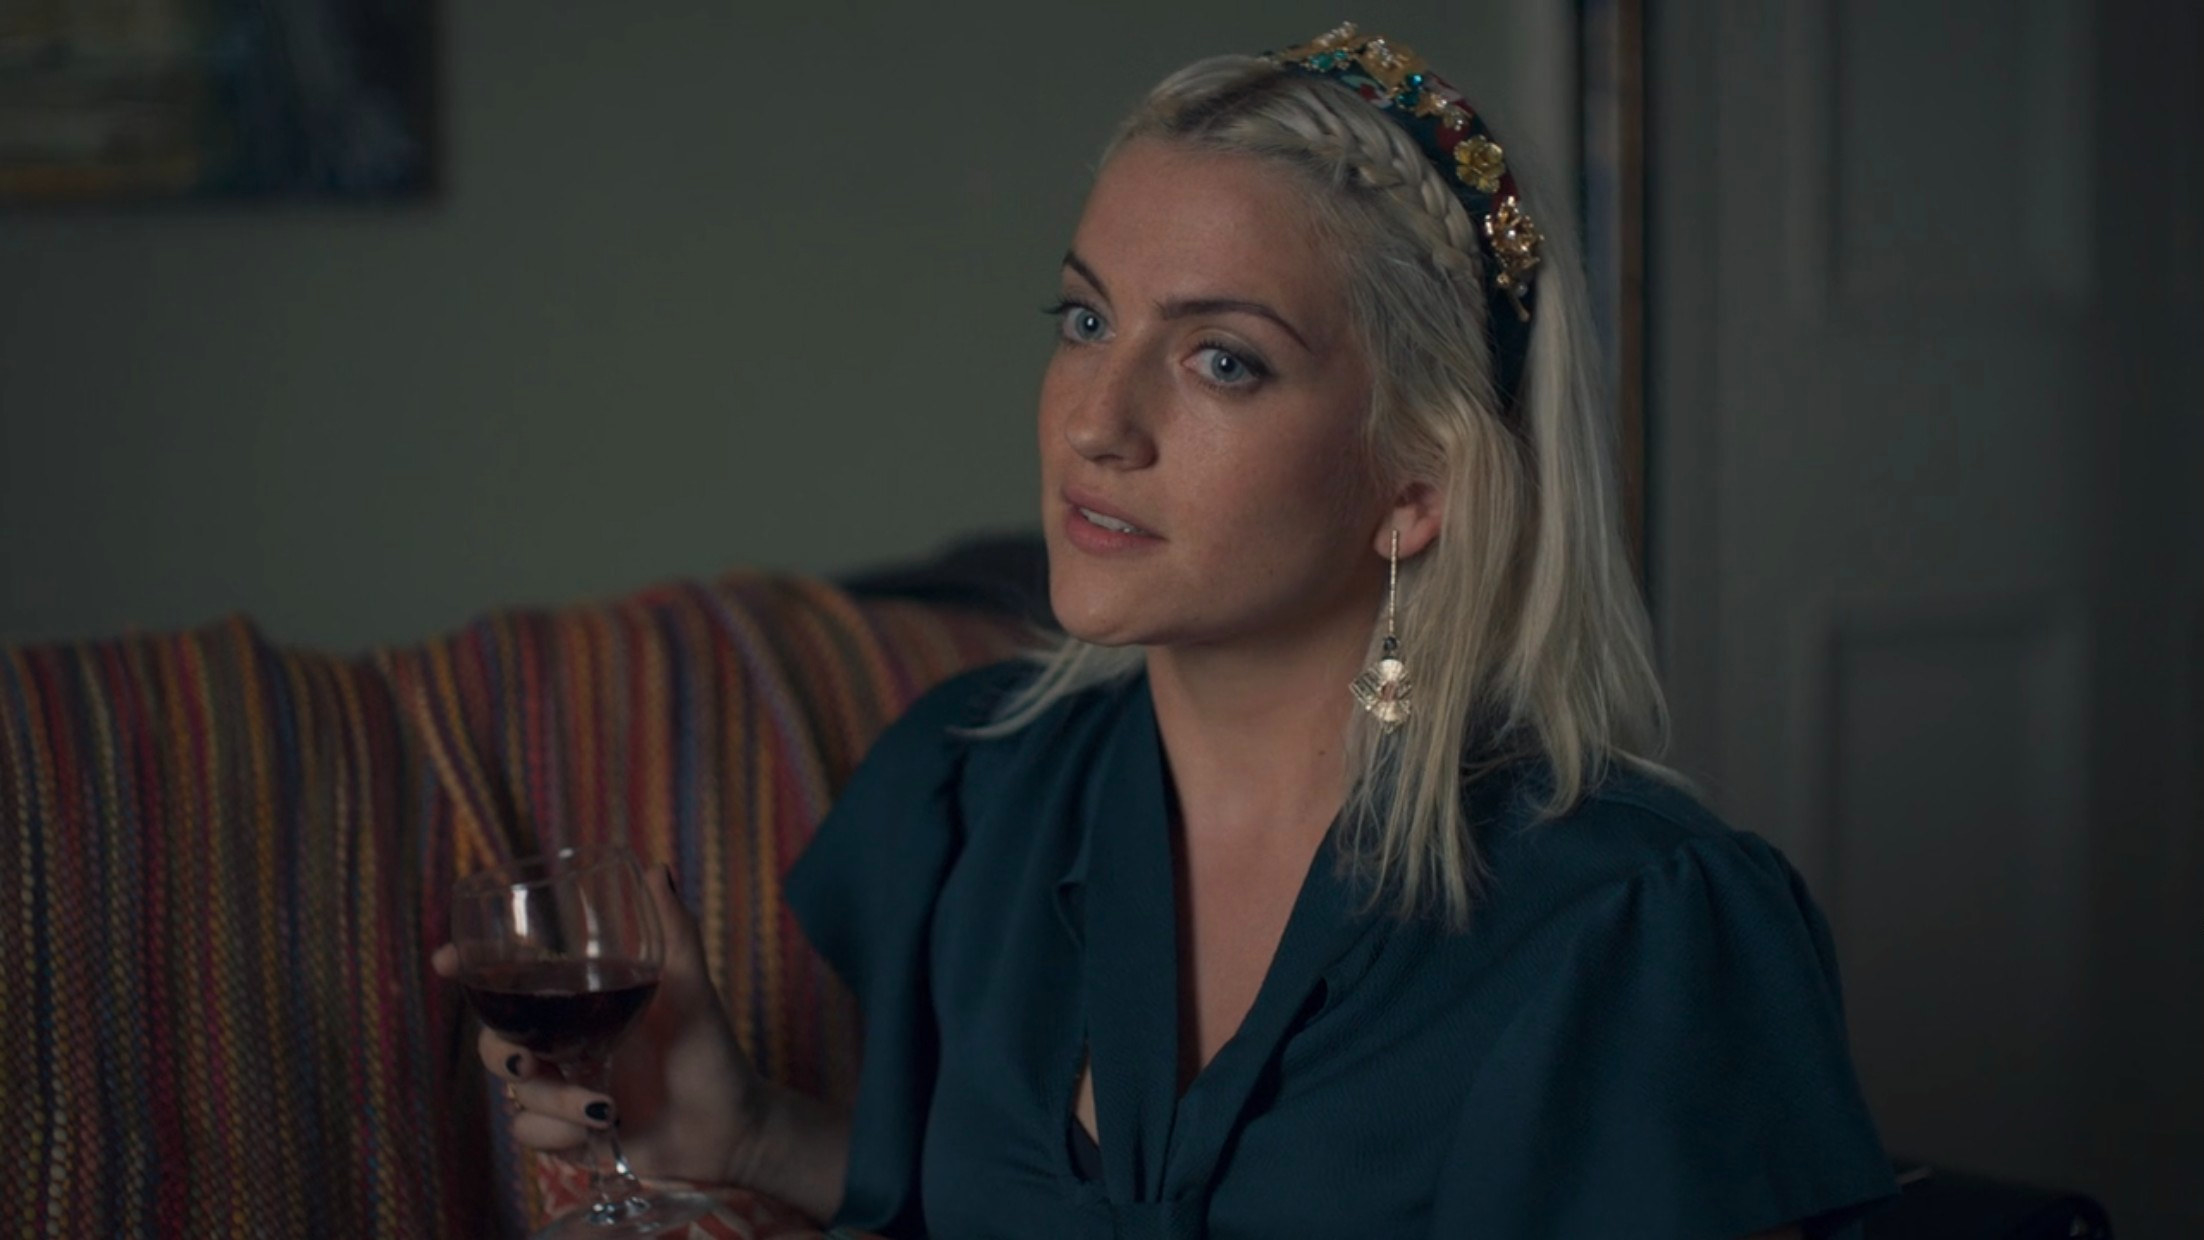 India Mullen as Peggy in Normal People, holding a glass of red wine